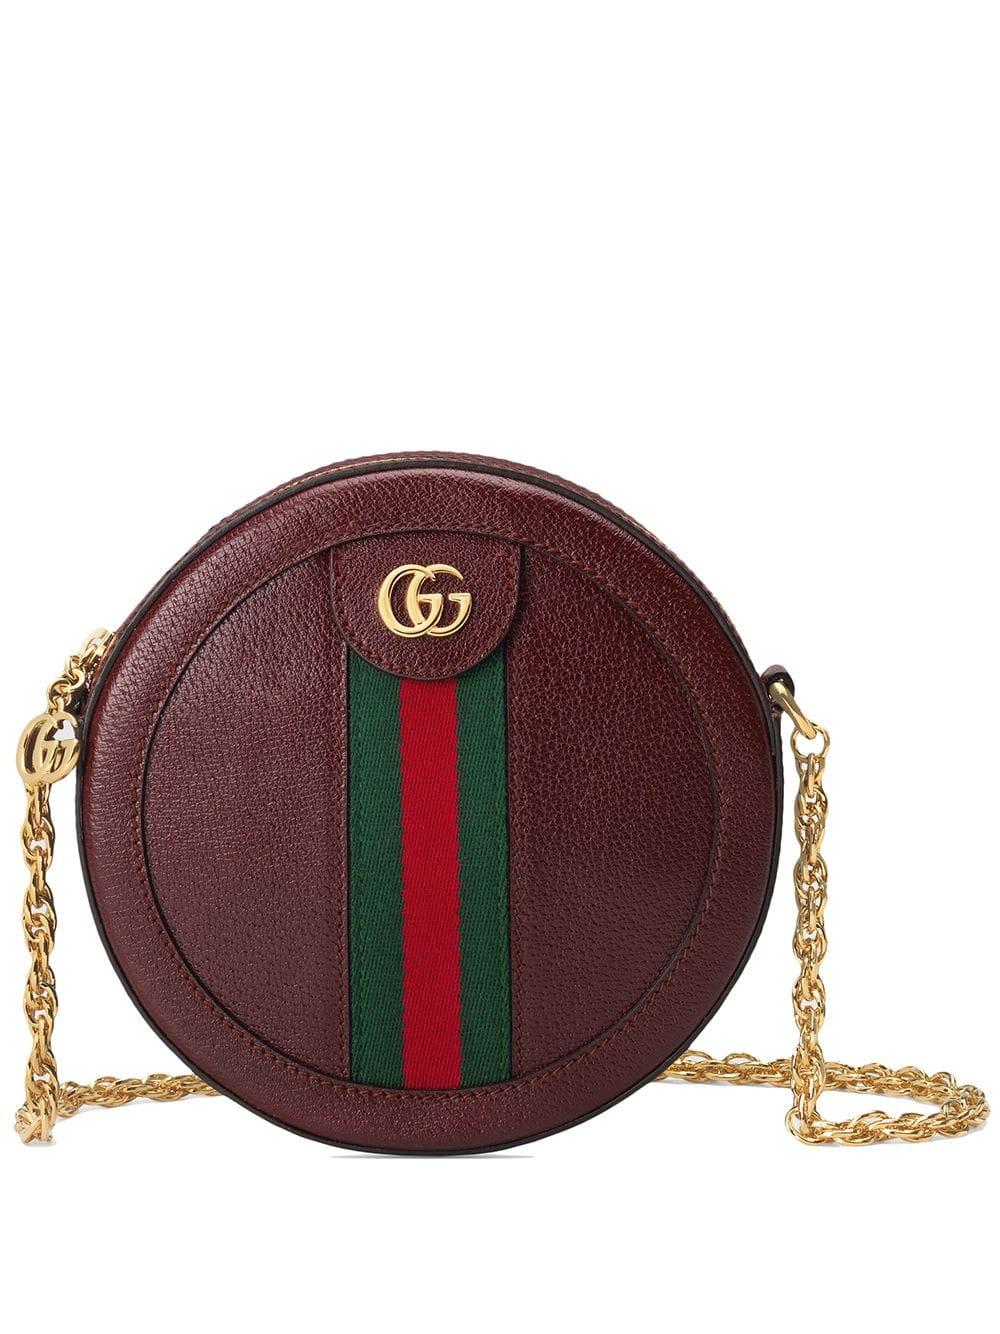 Gucci Leather Ophidia Mini Round Shoulder Bag in Bordeaux (Red) - Lyst